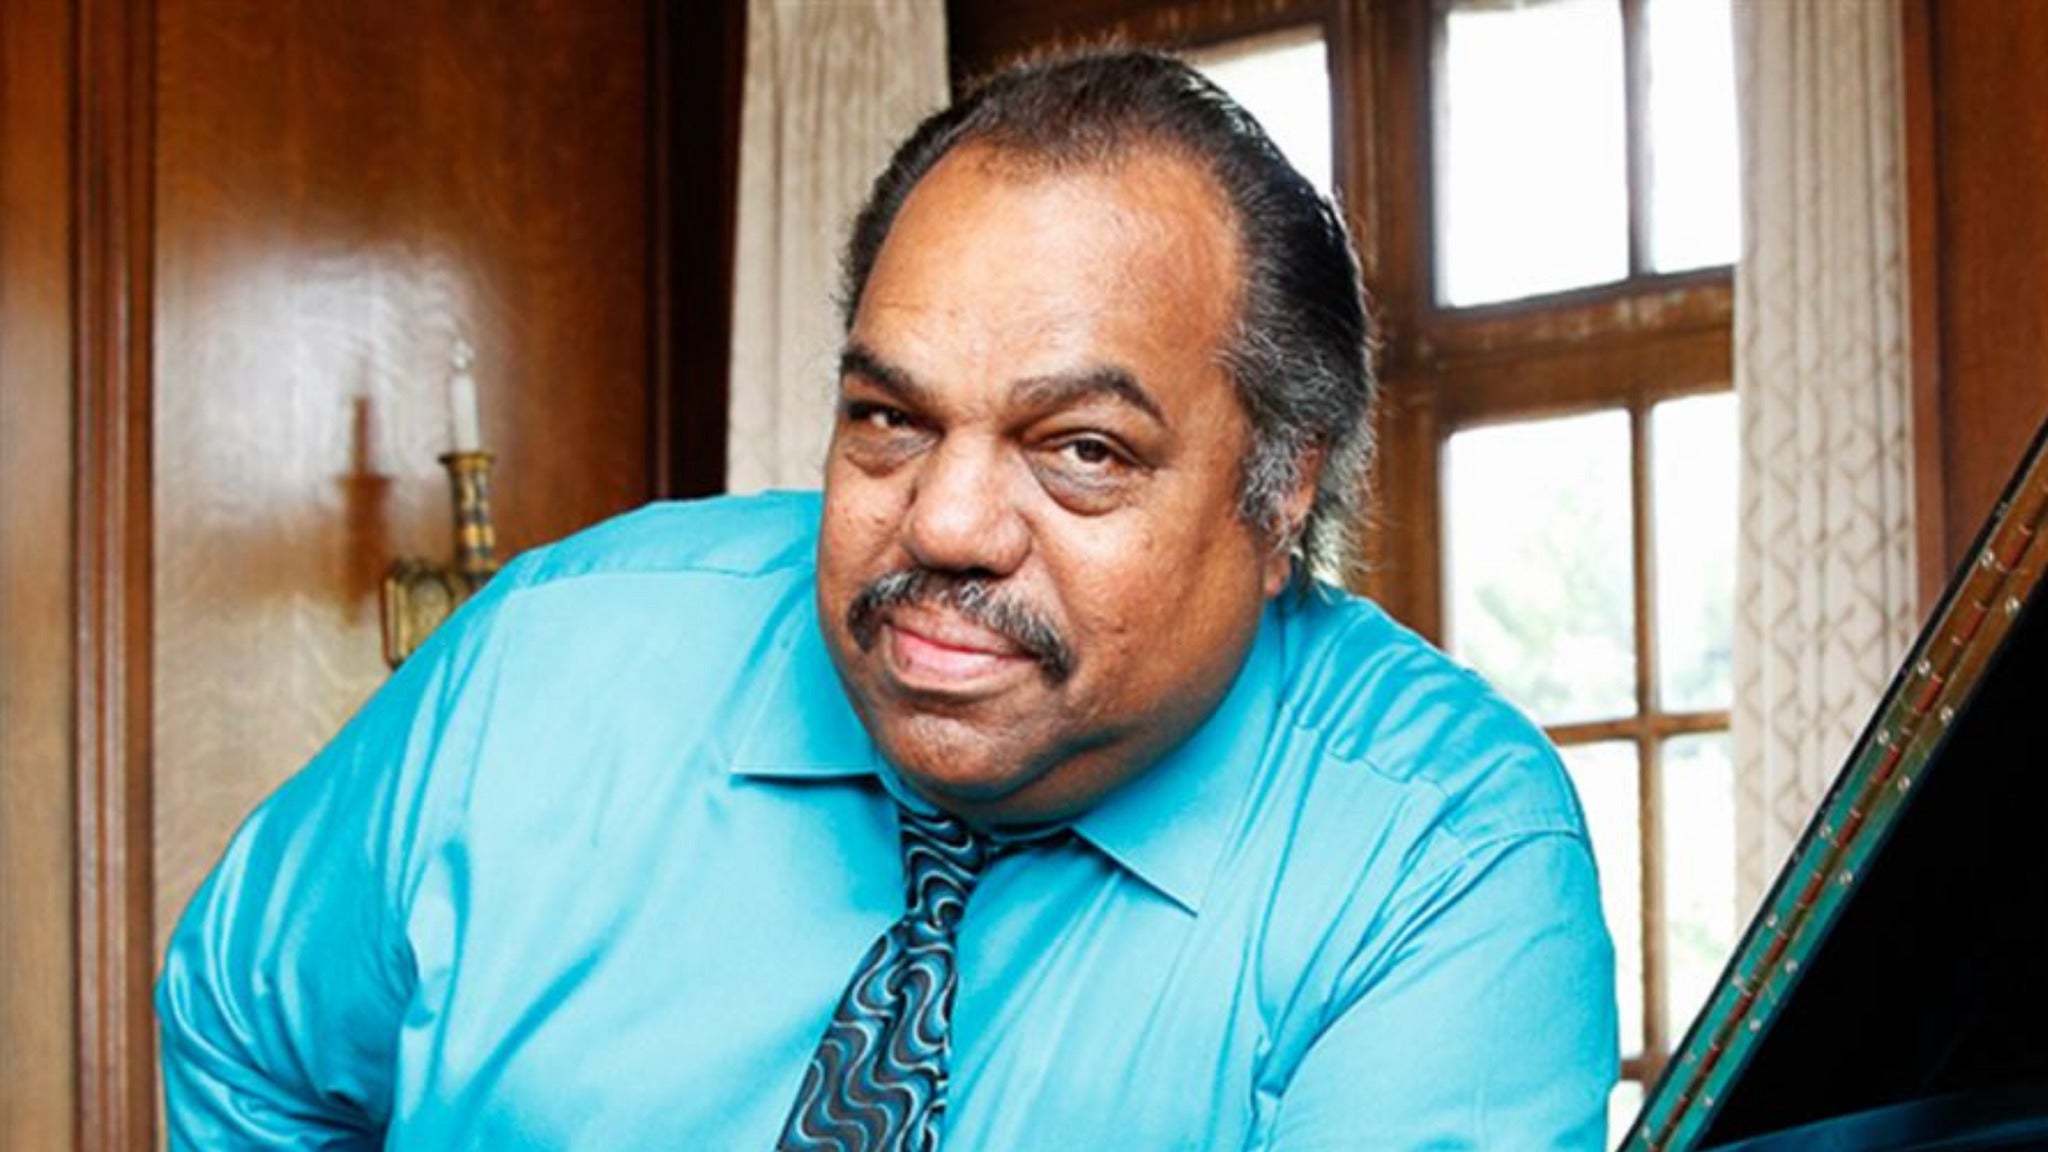 Daryl Davis Presents: Thanks For The Memories 2022!